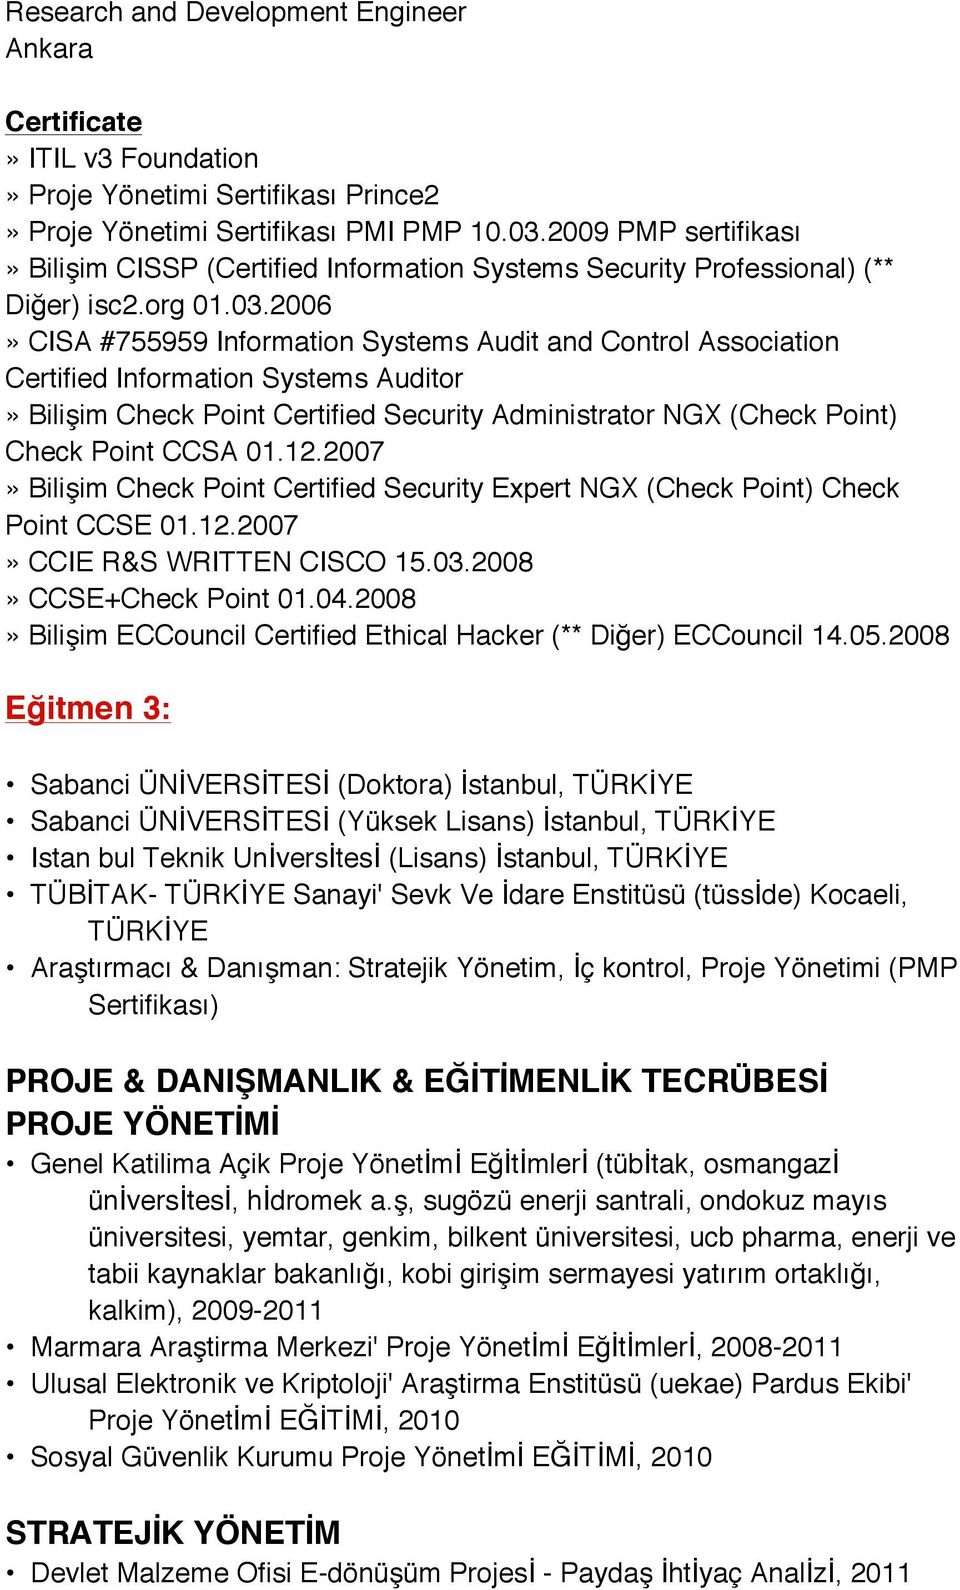 2006» CISA #755959 Information Systems Audit and Control Association Certified Information Systems Auditor» Bilişim Check Point Certified Security Administrator NGX (Check Point) Check Point CCSA 01.